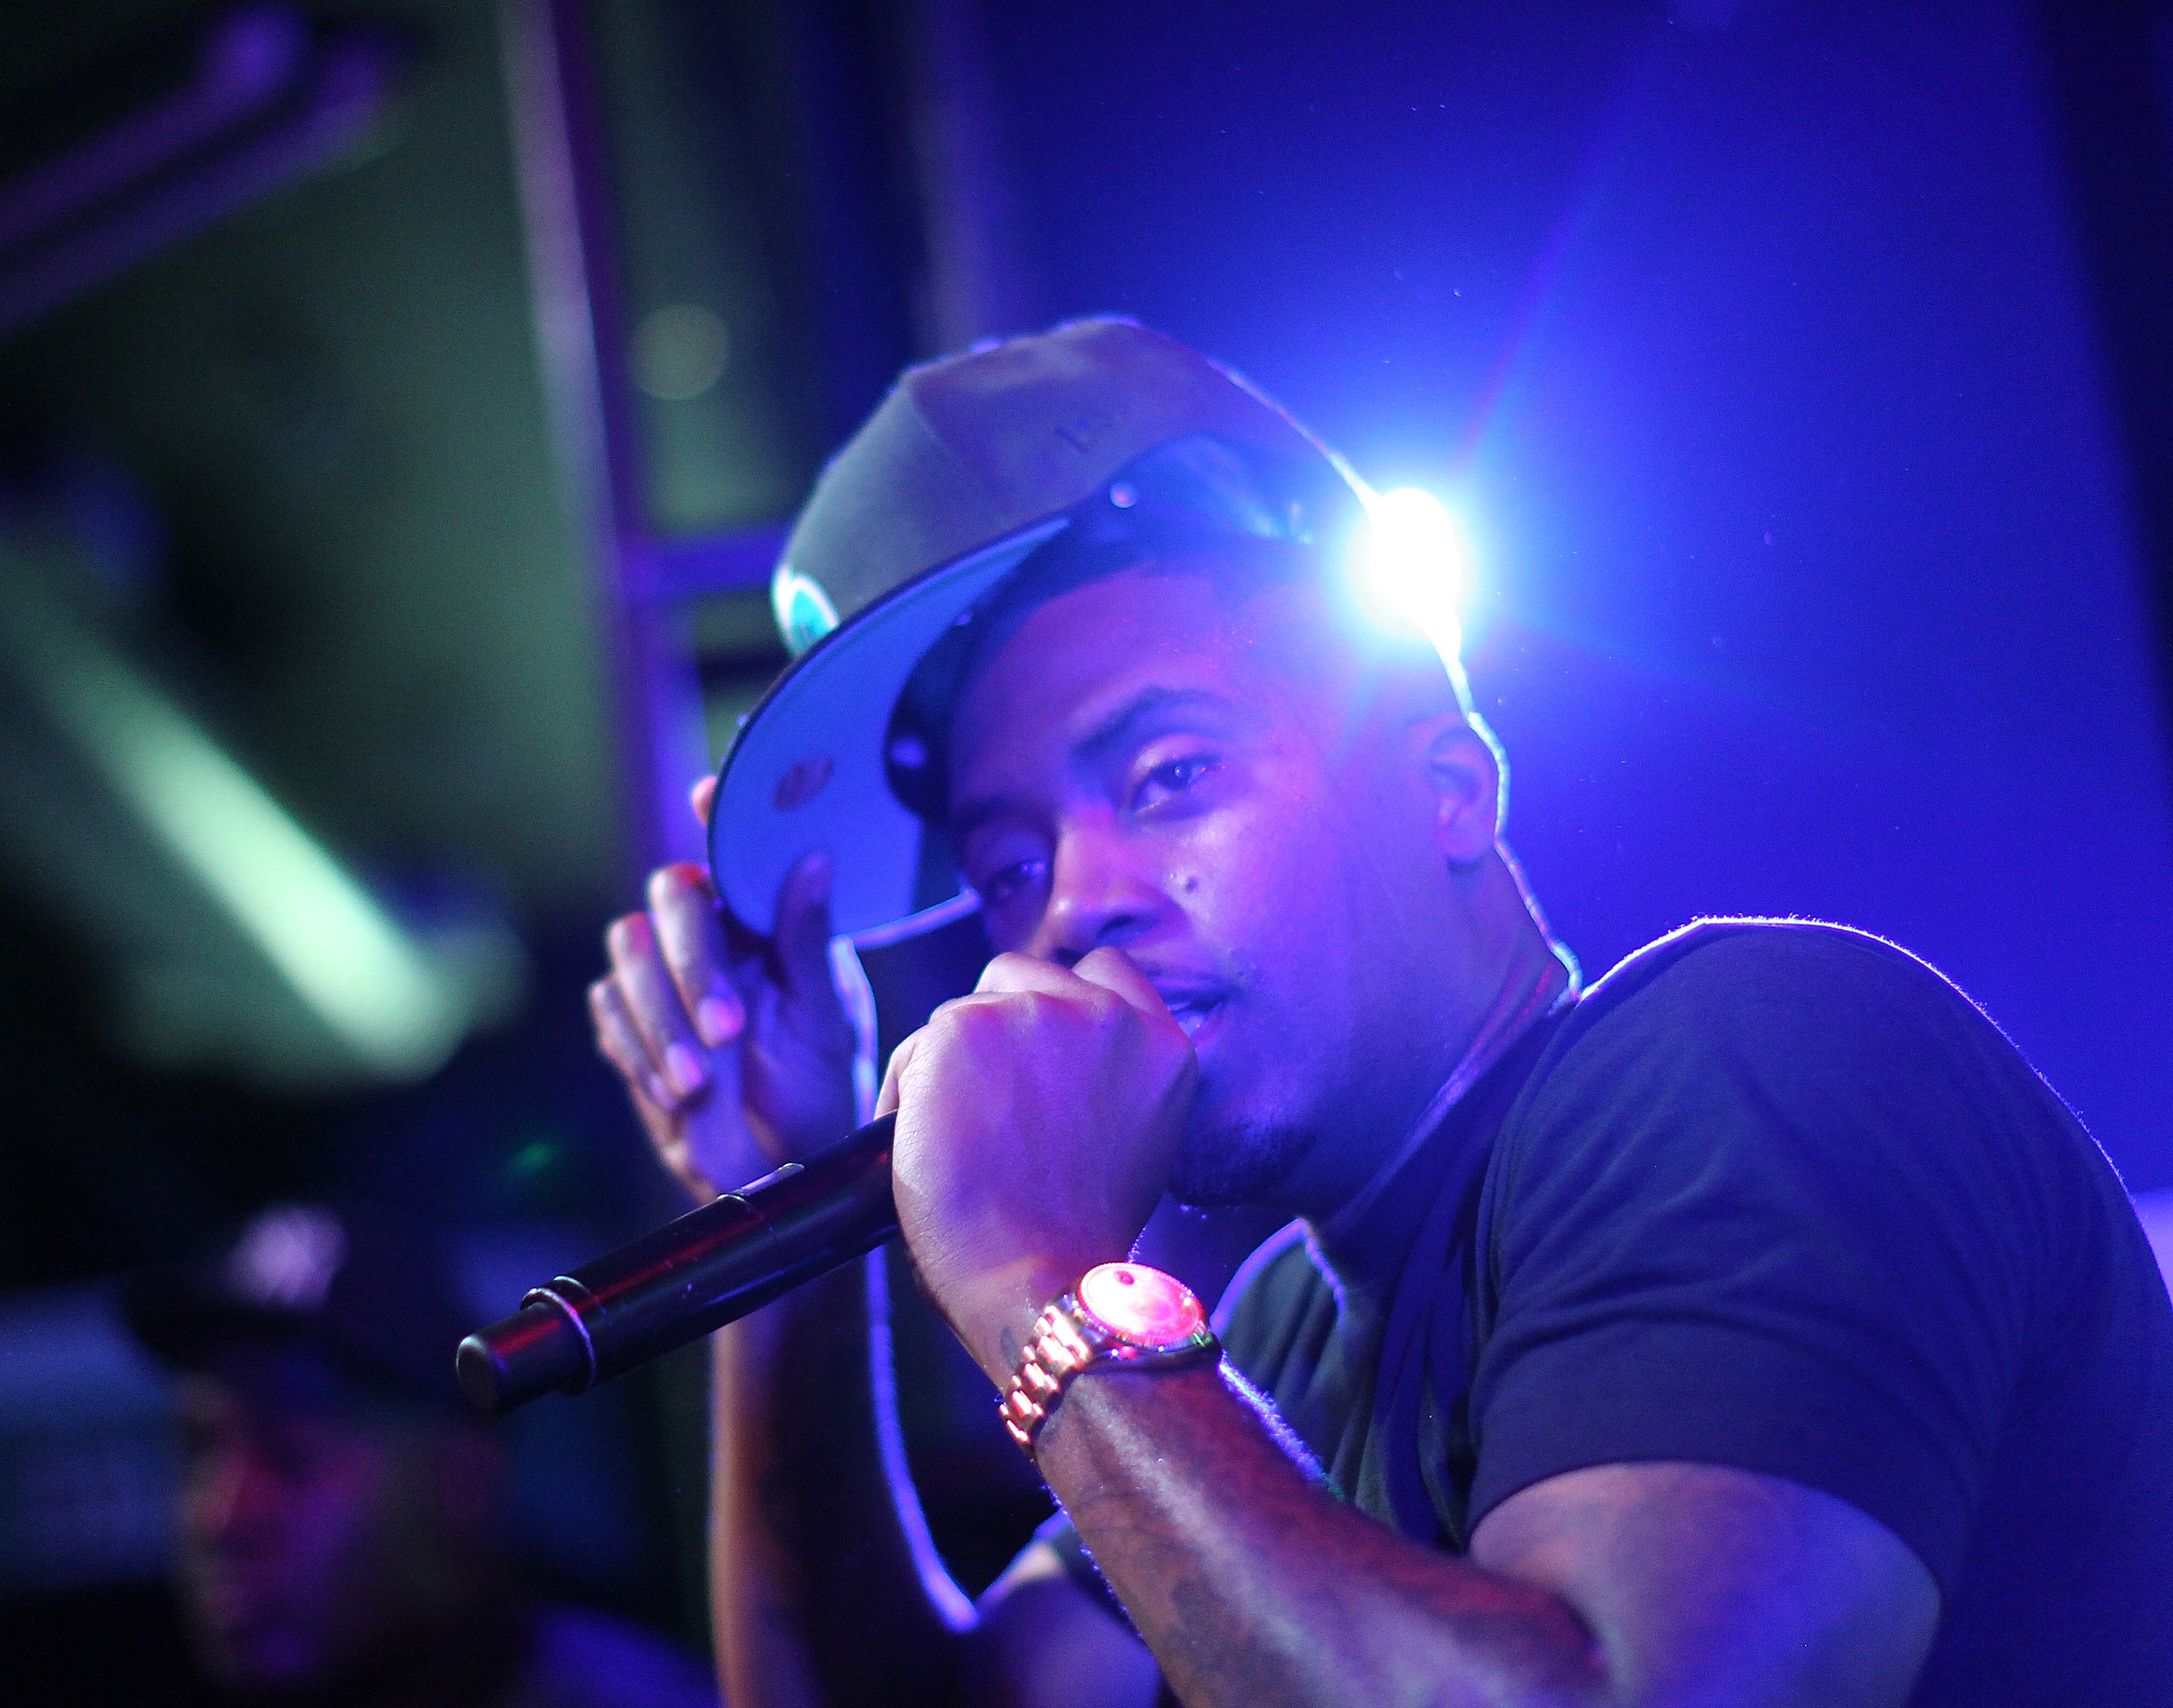 Live Stream Summer Jam XXI, Featuring Sets From Nas, 50 Cent, Nicki